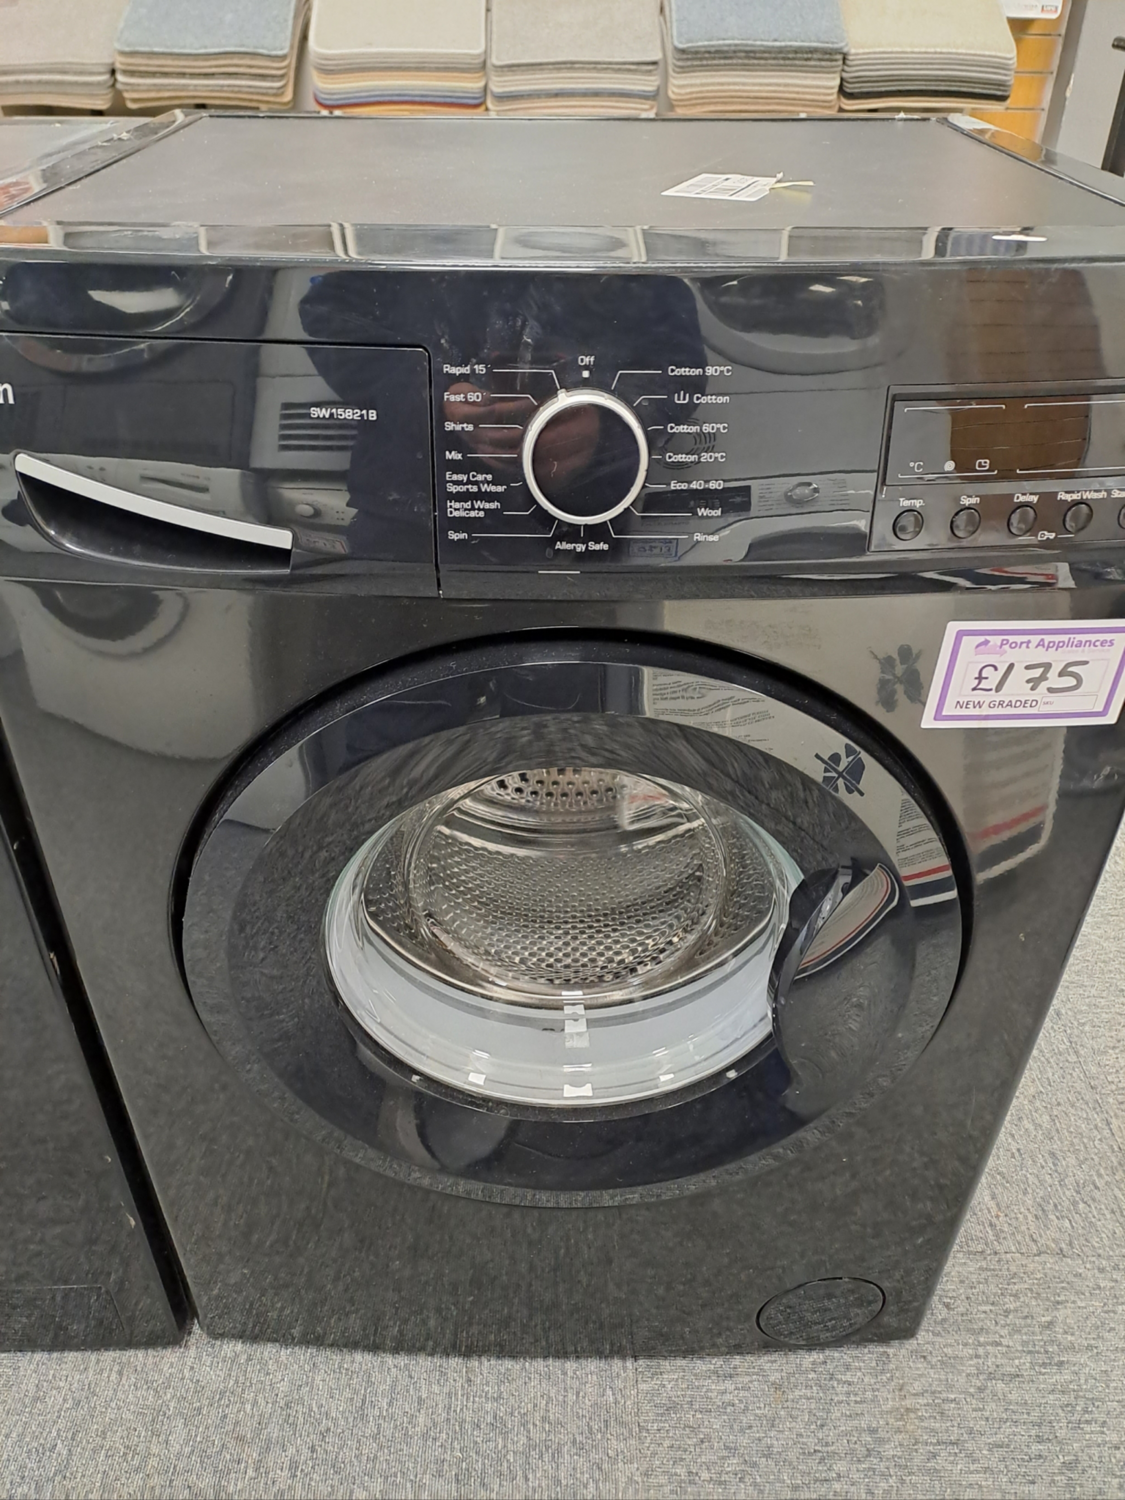 Swan SW15842B 9kg Load 1200 Spin Washing Machine Black Graded. Whitby Road Shop 